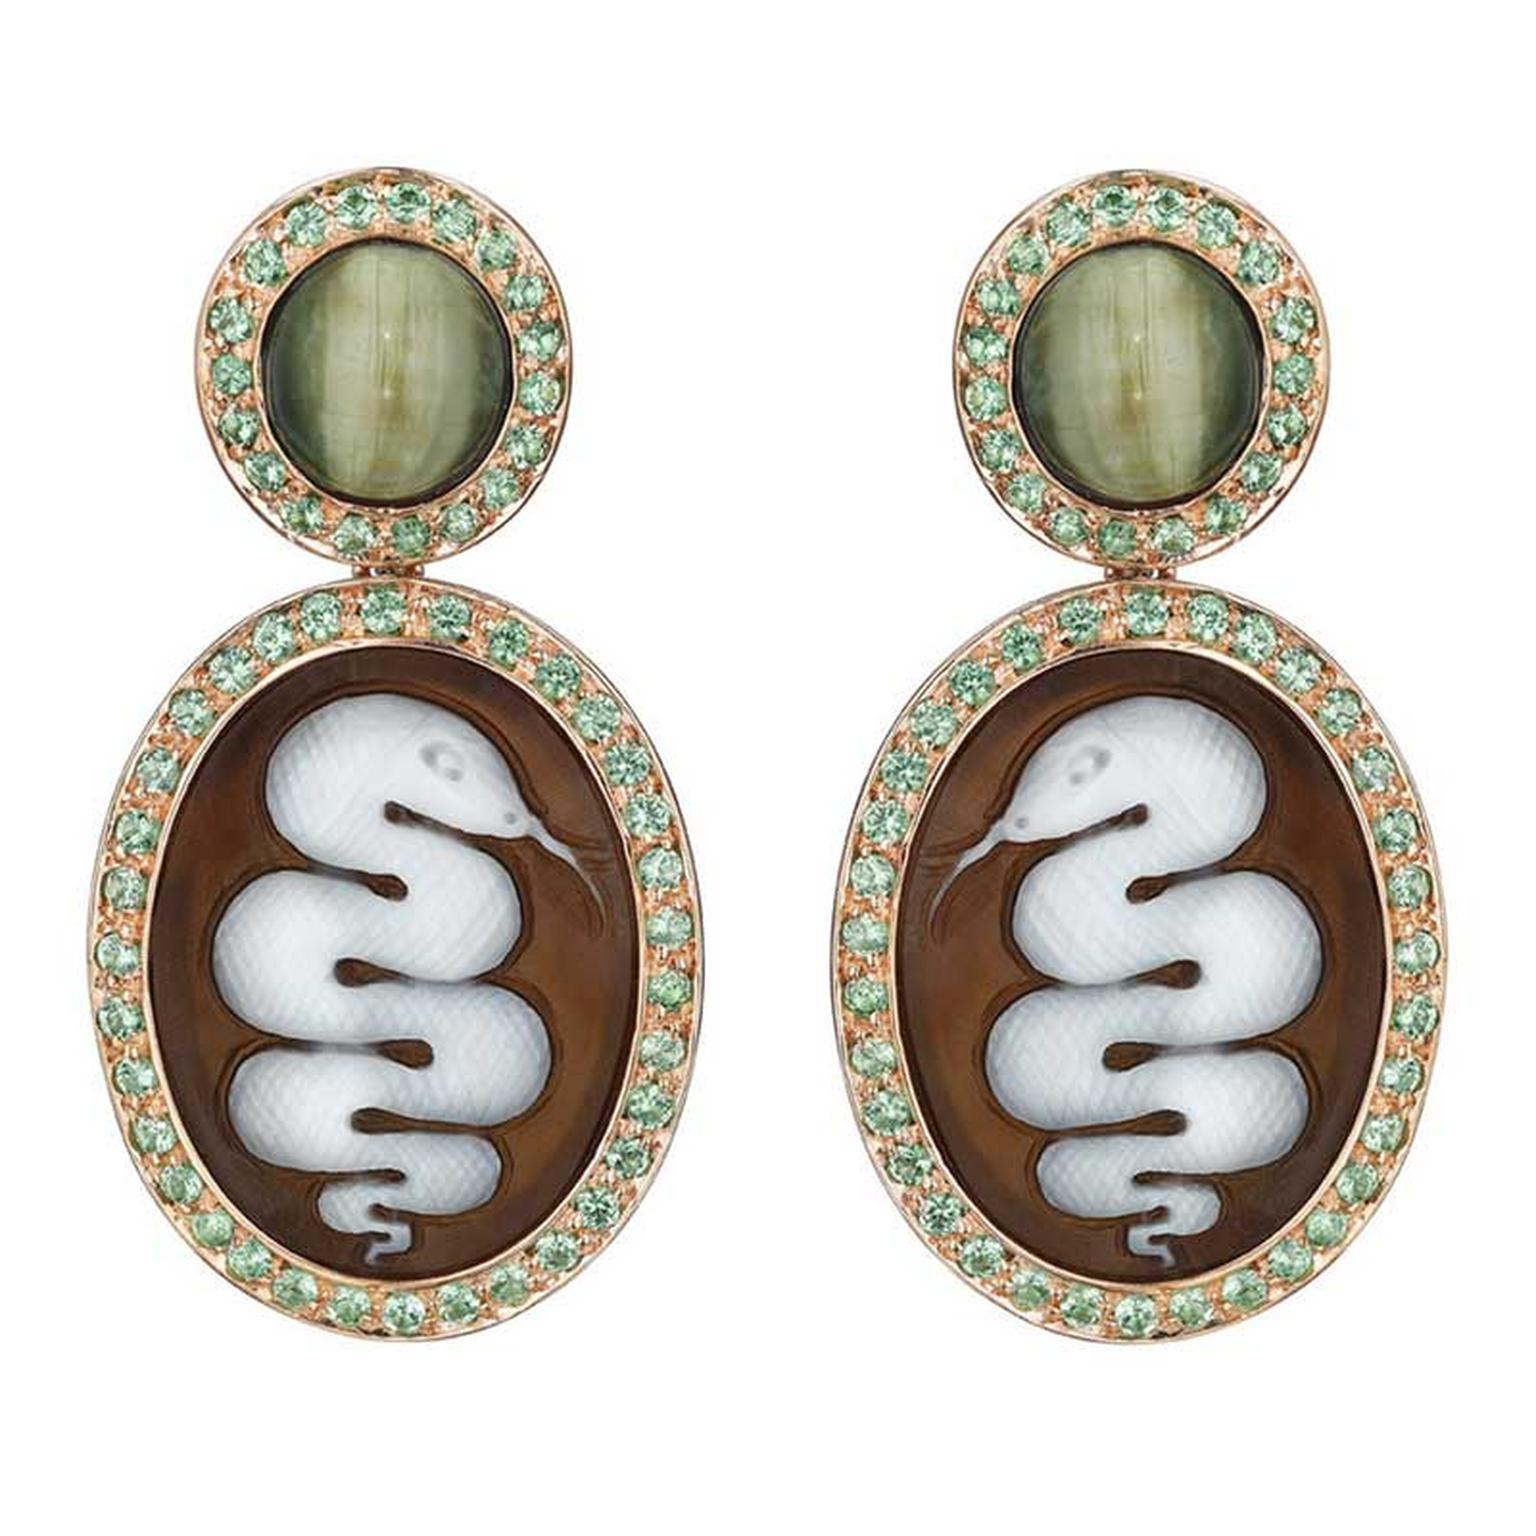 Amedeo Couture Serpent cameo earrings